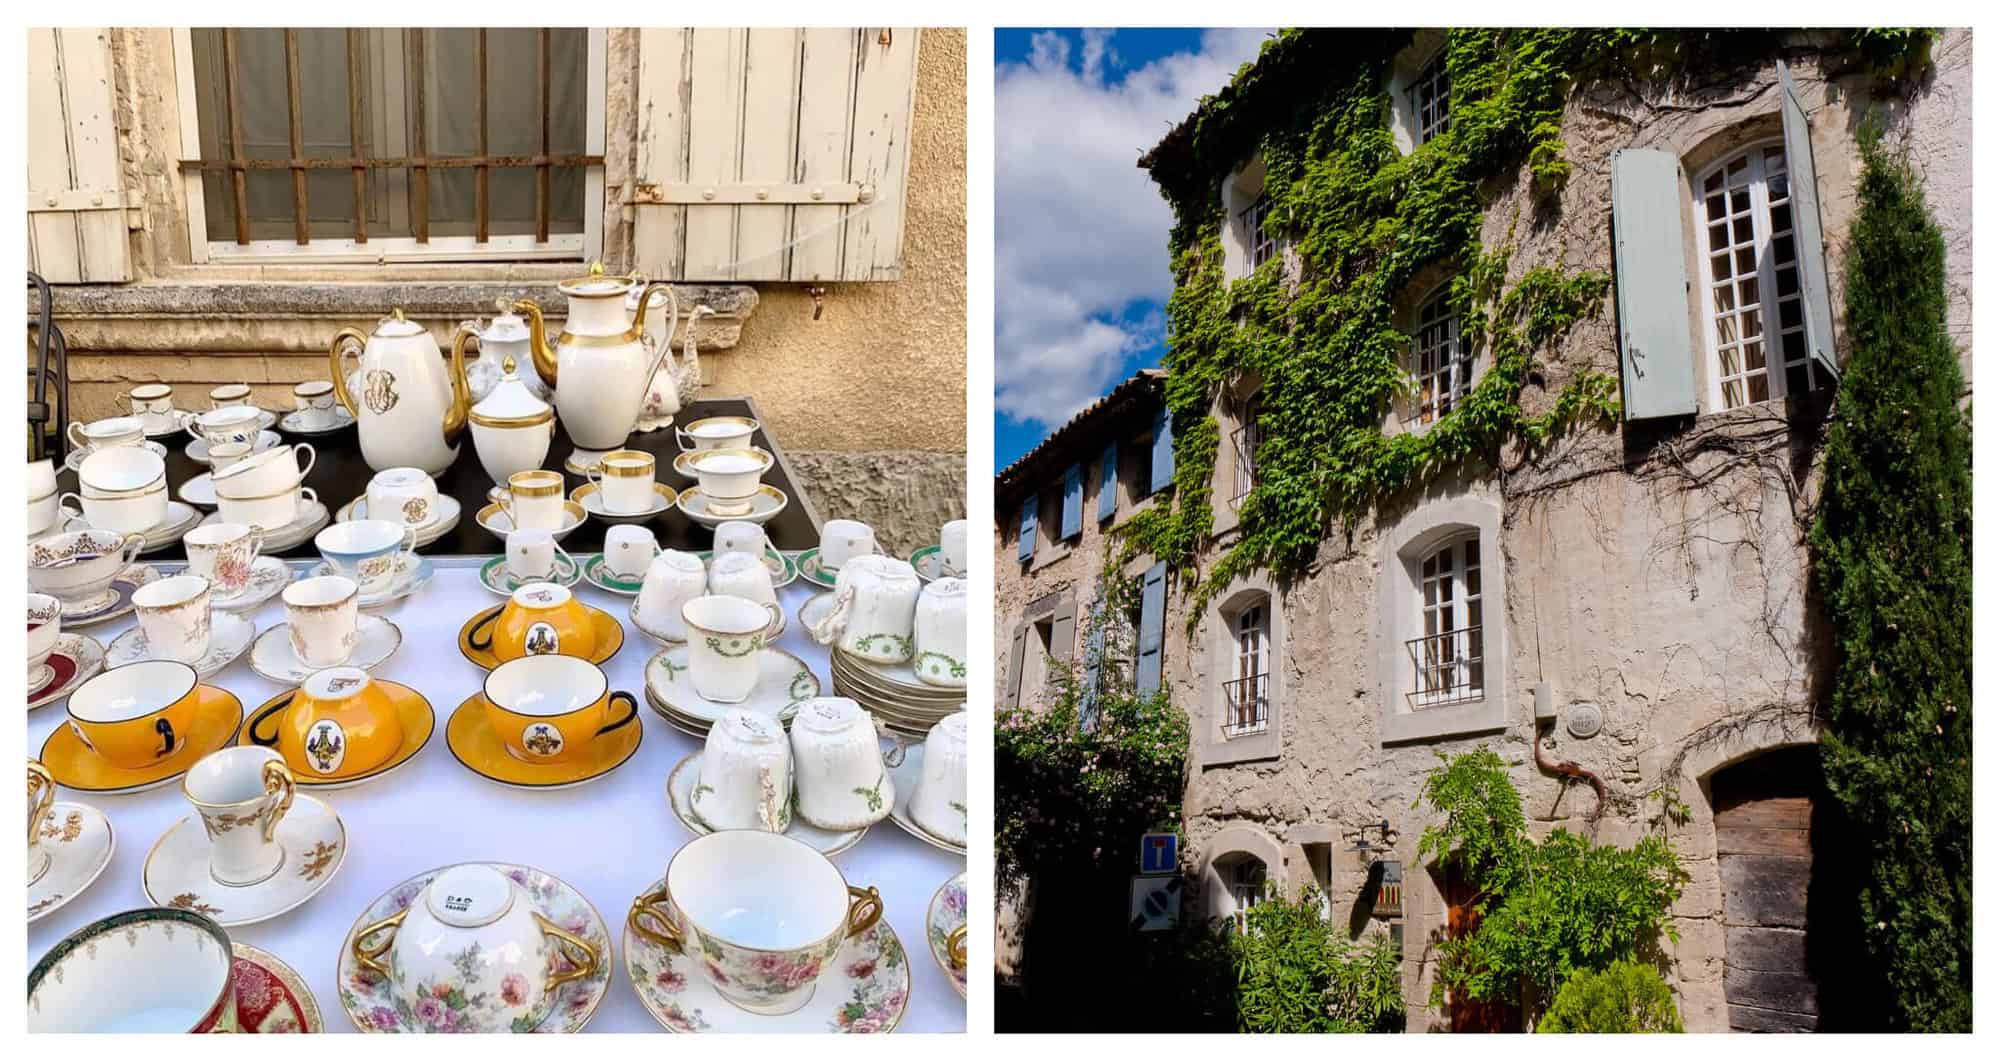 Left: a table with several sets of tea cups and saucers and a full tea set. Left: A stone Meditteranean building covered in green ivy with pale green and light blue shutters.